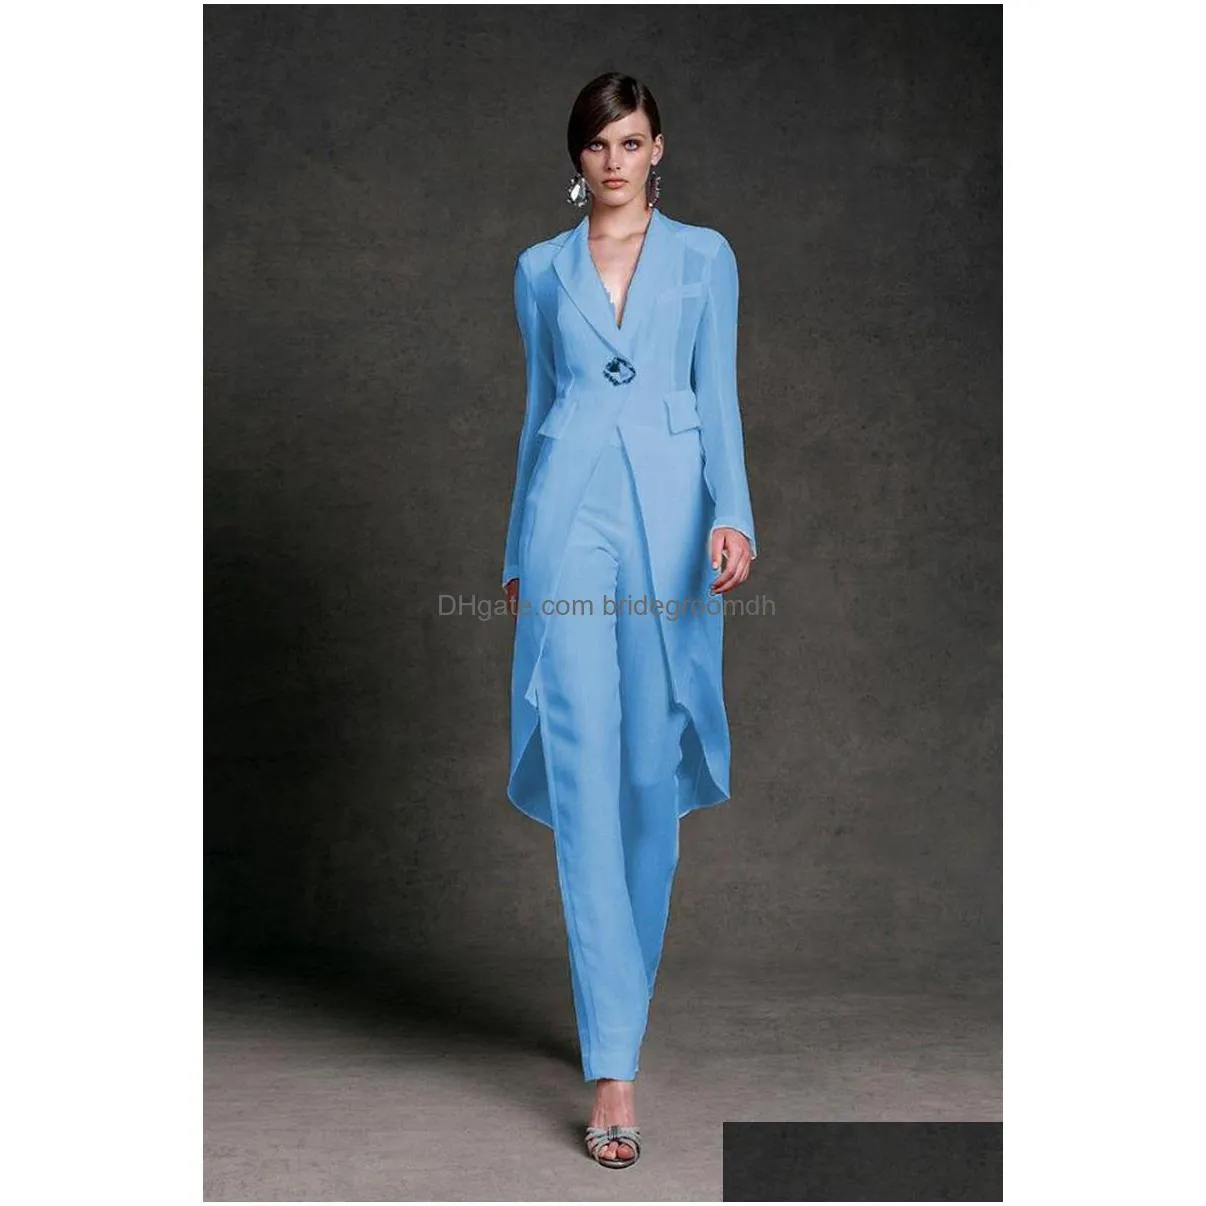 jumpsuits 2019 mother of the bride dresses v neck pant suits wedding guest gowns with jackets long sleeve chiffon mothers groom